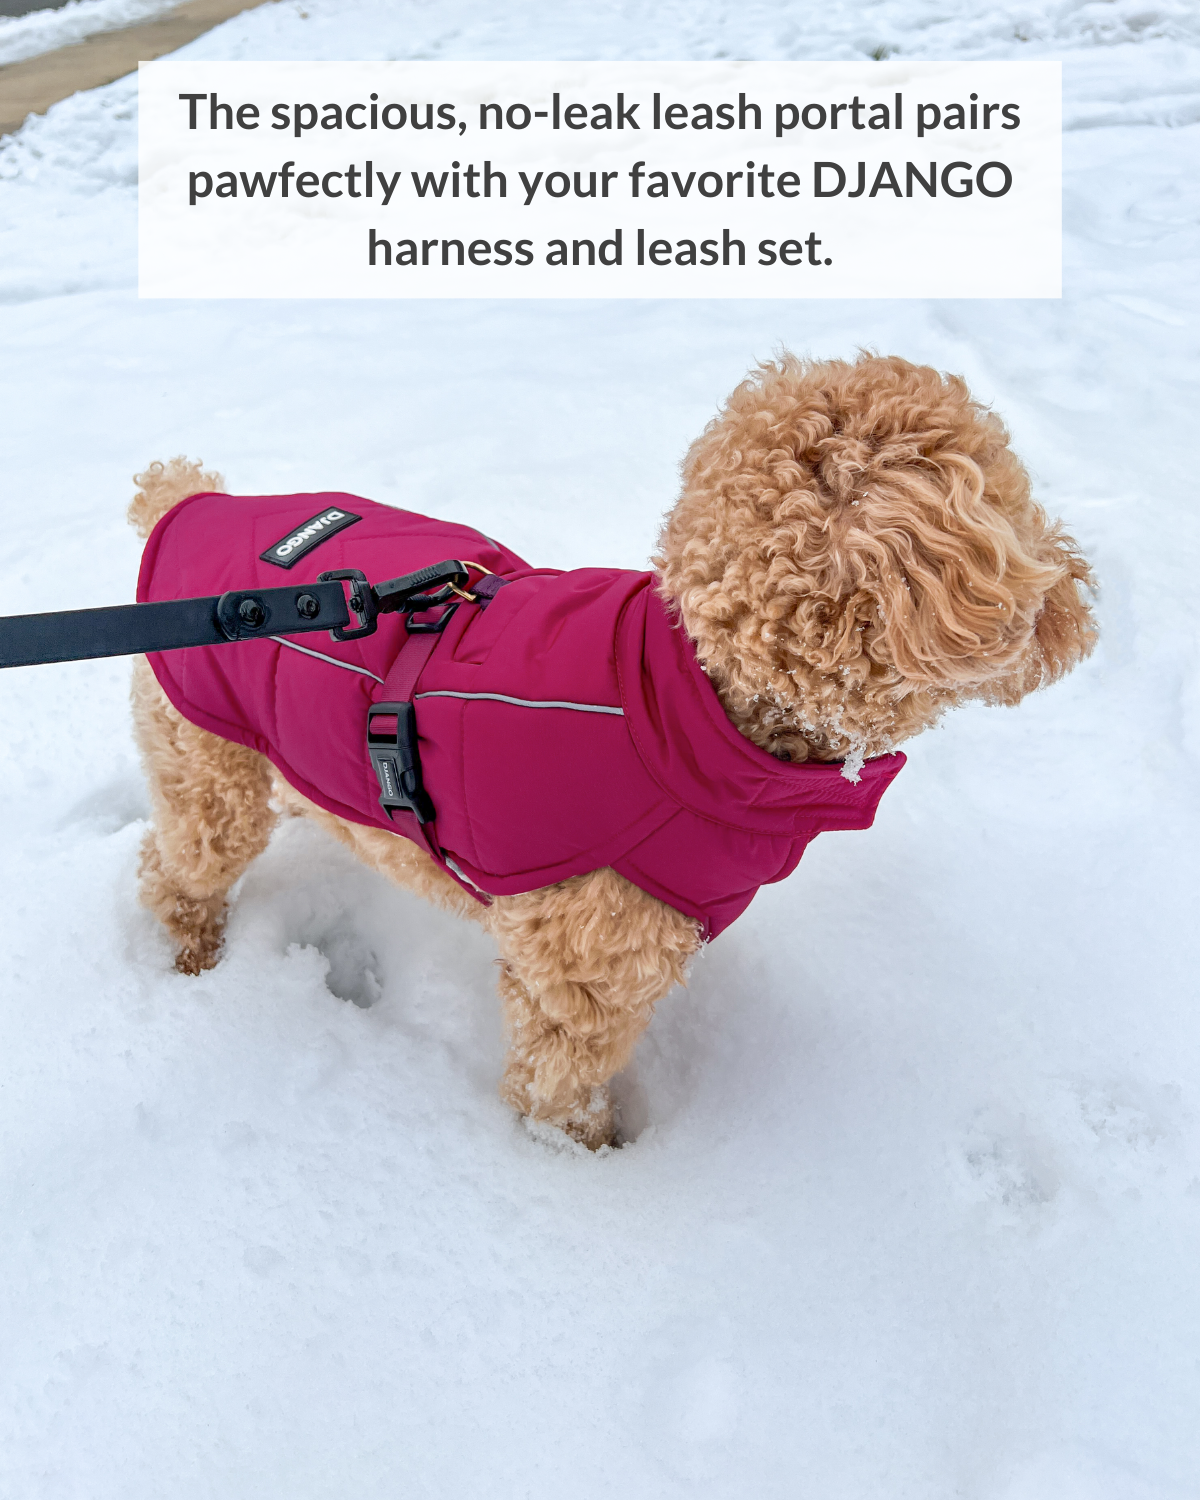 DJANGO dog coats feature a large, spacious, and no-leak leash portal that pairs perfectly with your favorite DJANGO dog harness and leash set. Maisey the poodle mix, featured here, is wearing her Whistler Winter Dog Coat with her Adventure Dog Harness - djangobrand.com